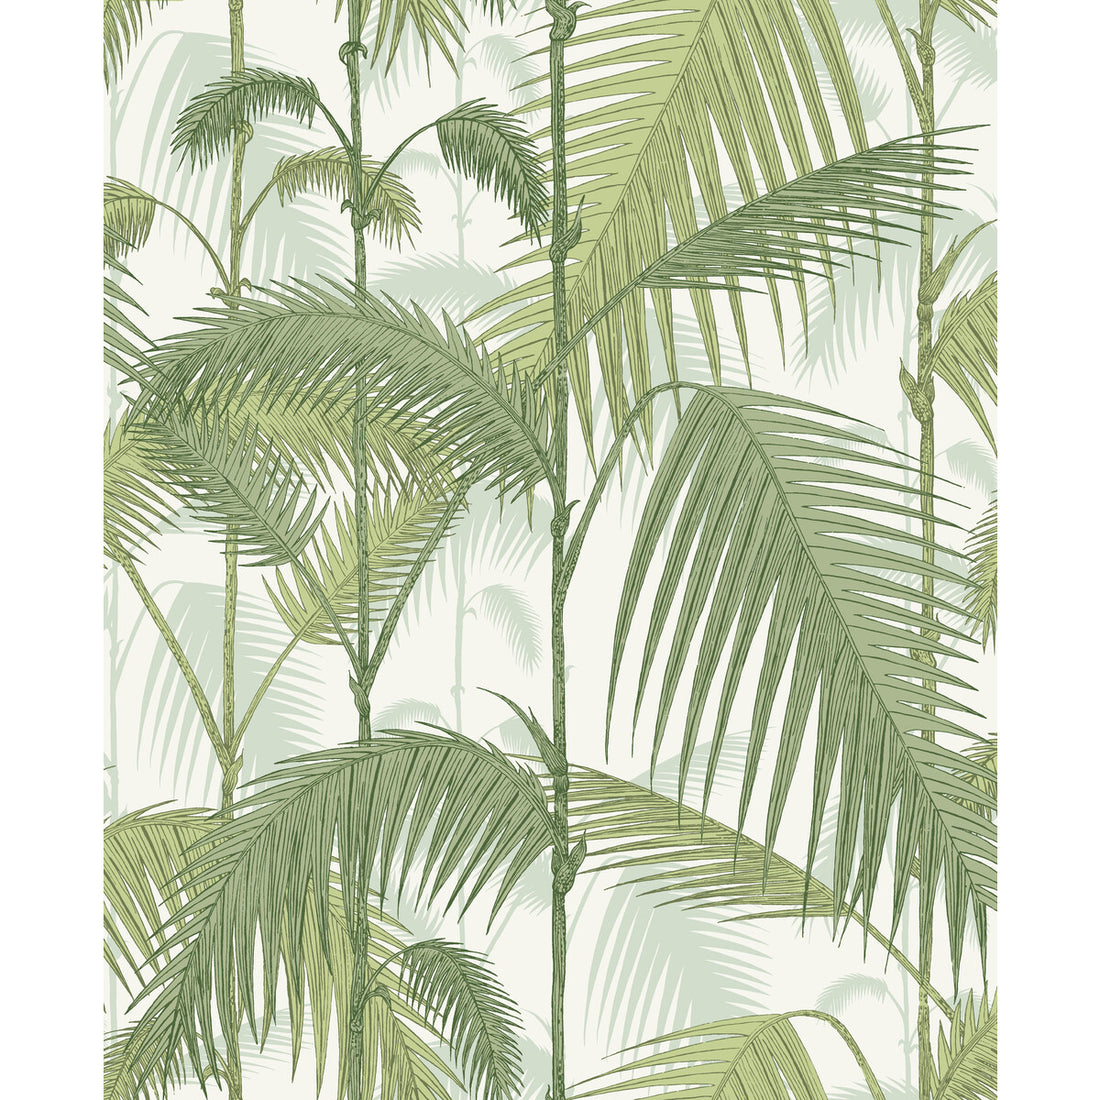 Palm Jungle fabric in olv grn on wht color - pattern F111/2007L.CS.0 - by Cole &amp; Son in the Cole &amp; Son Contemporary Fabrics collection